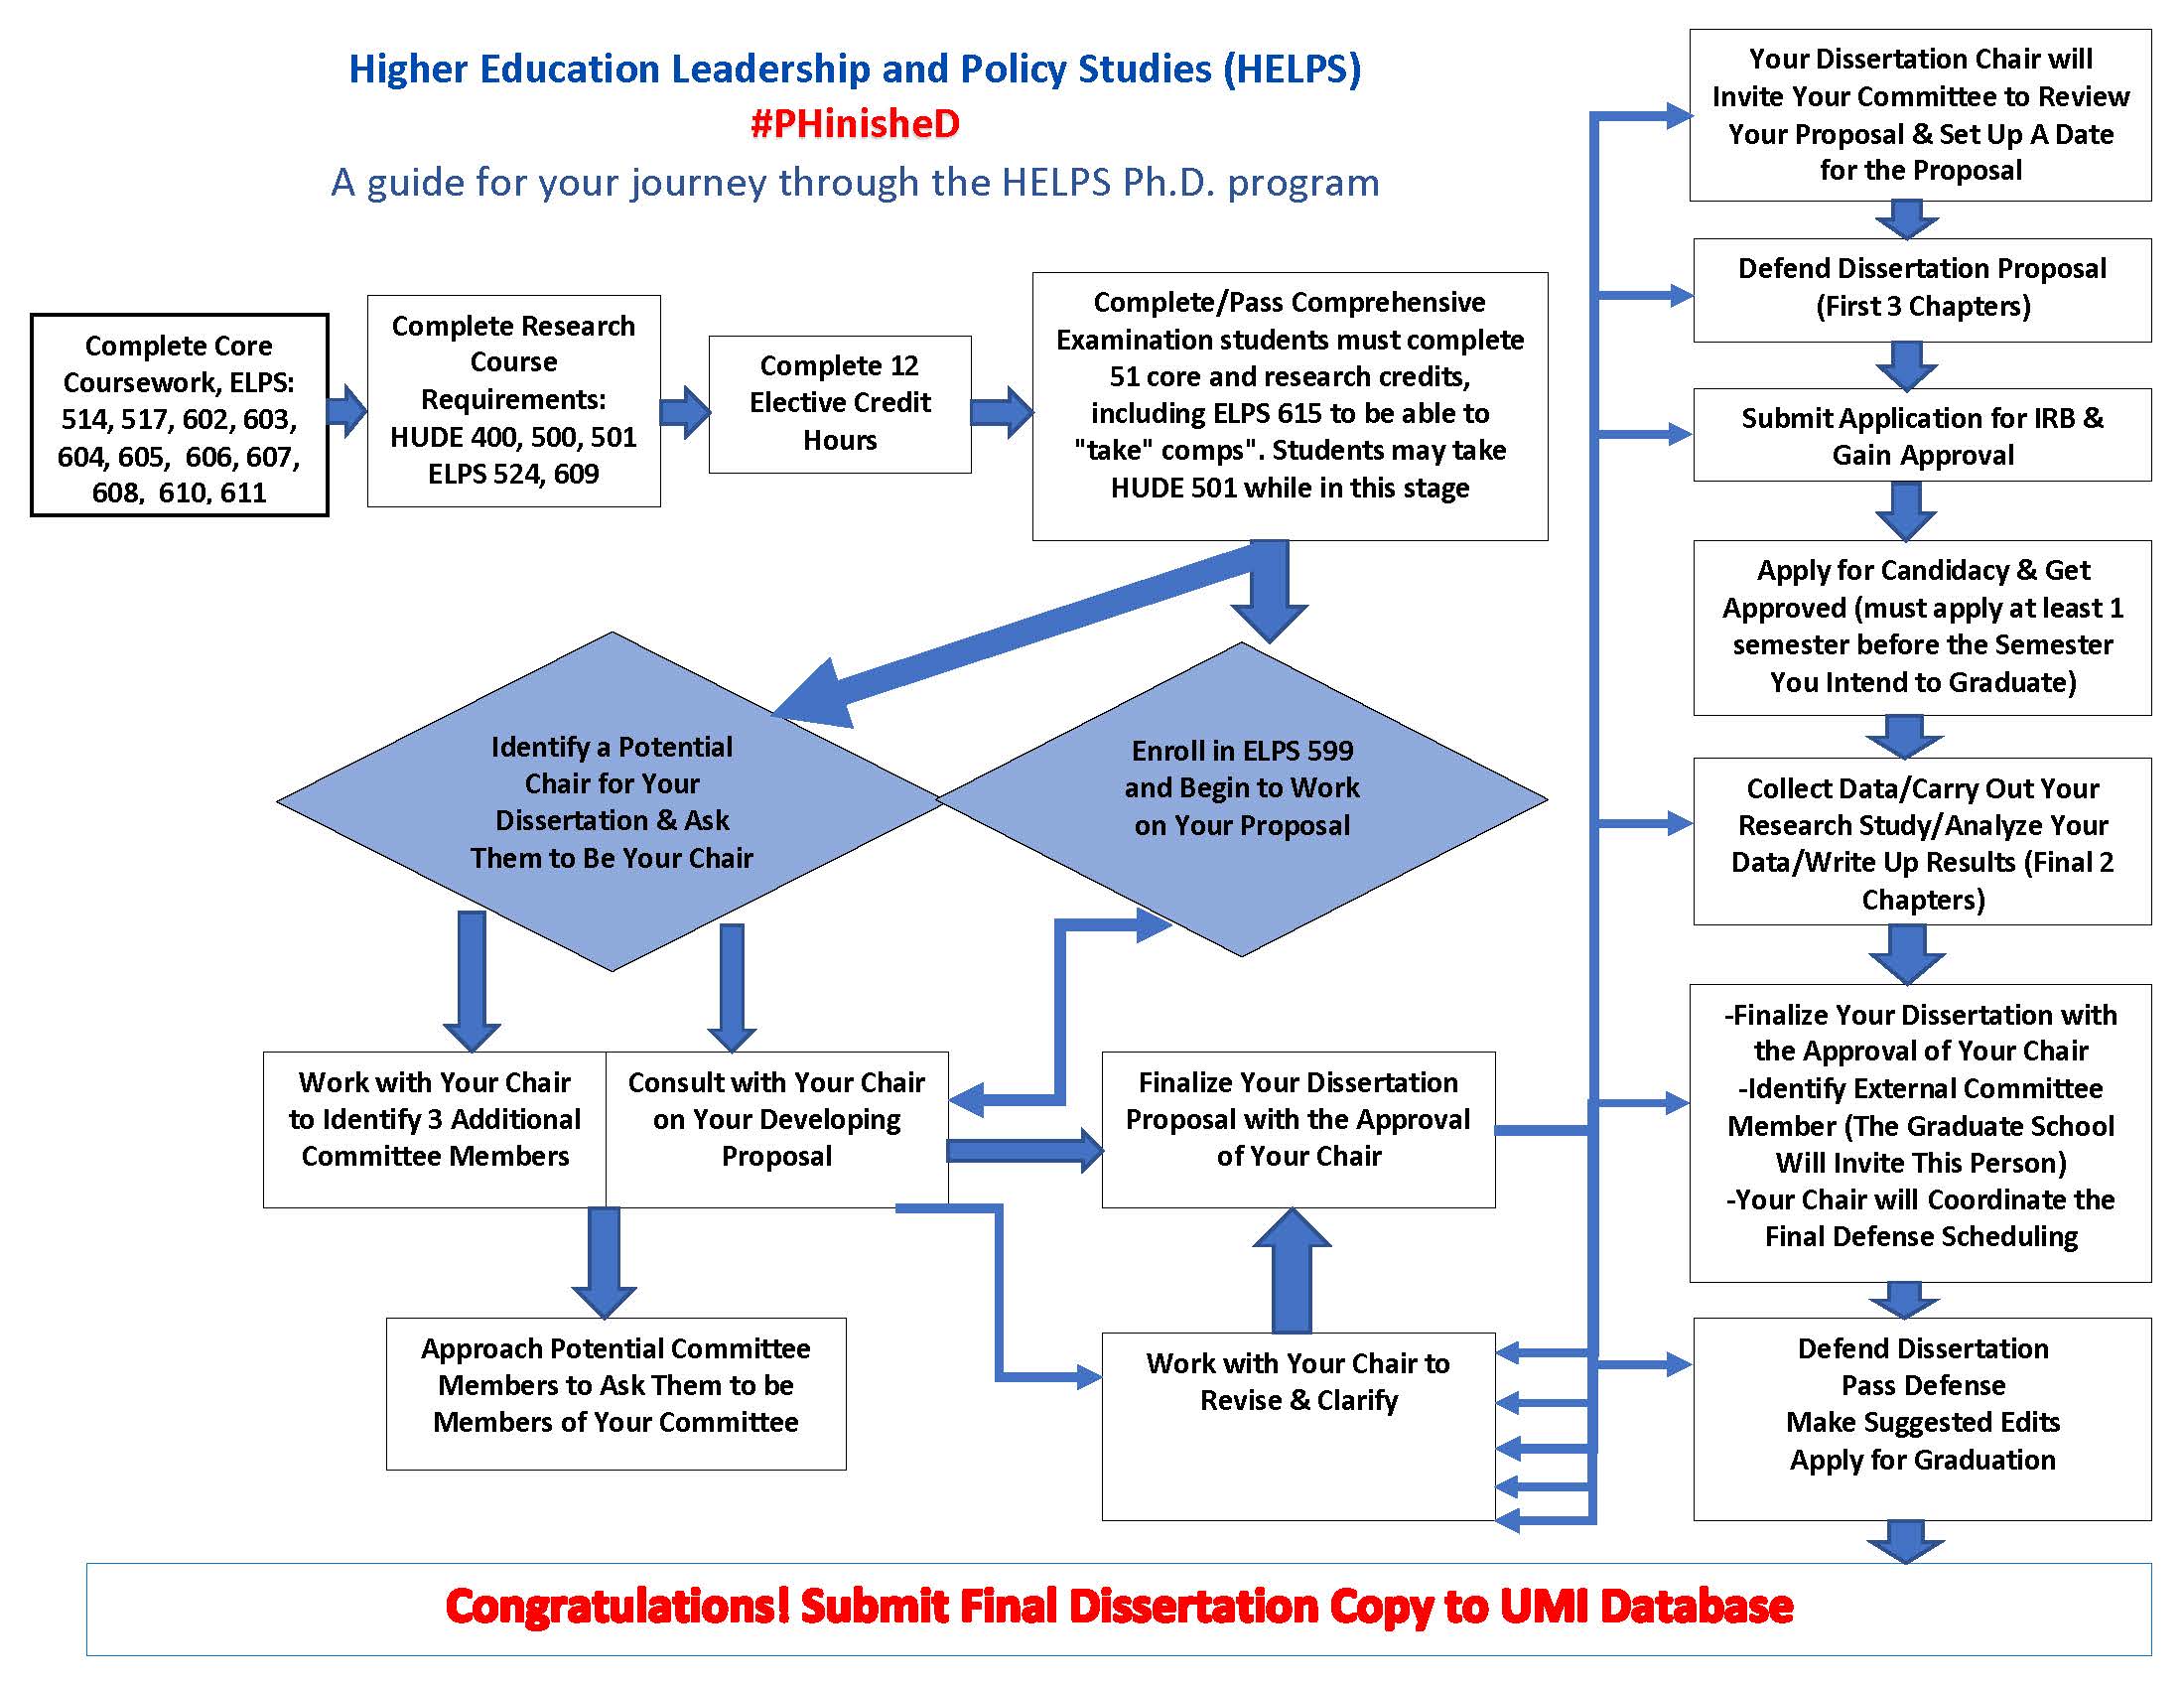 HELPS PhD infographic